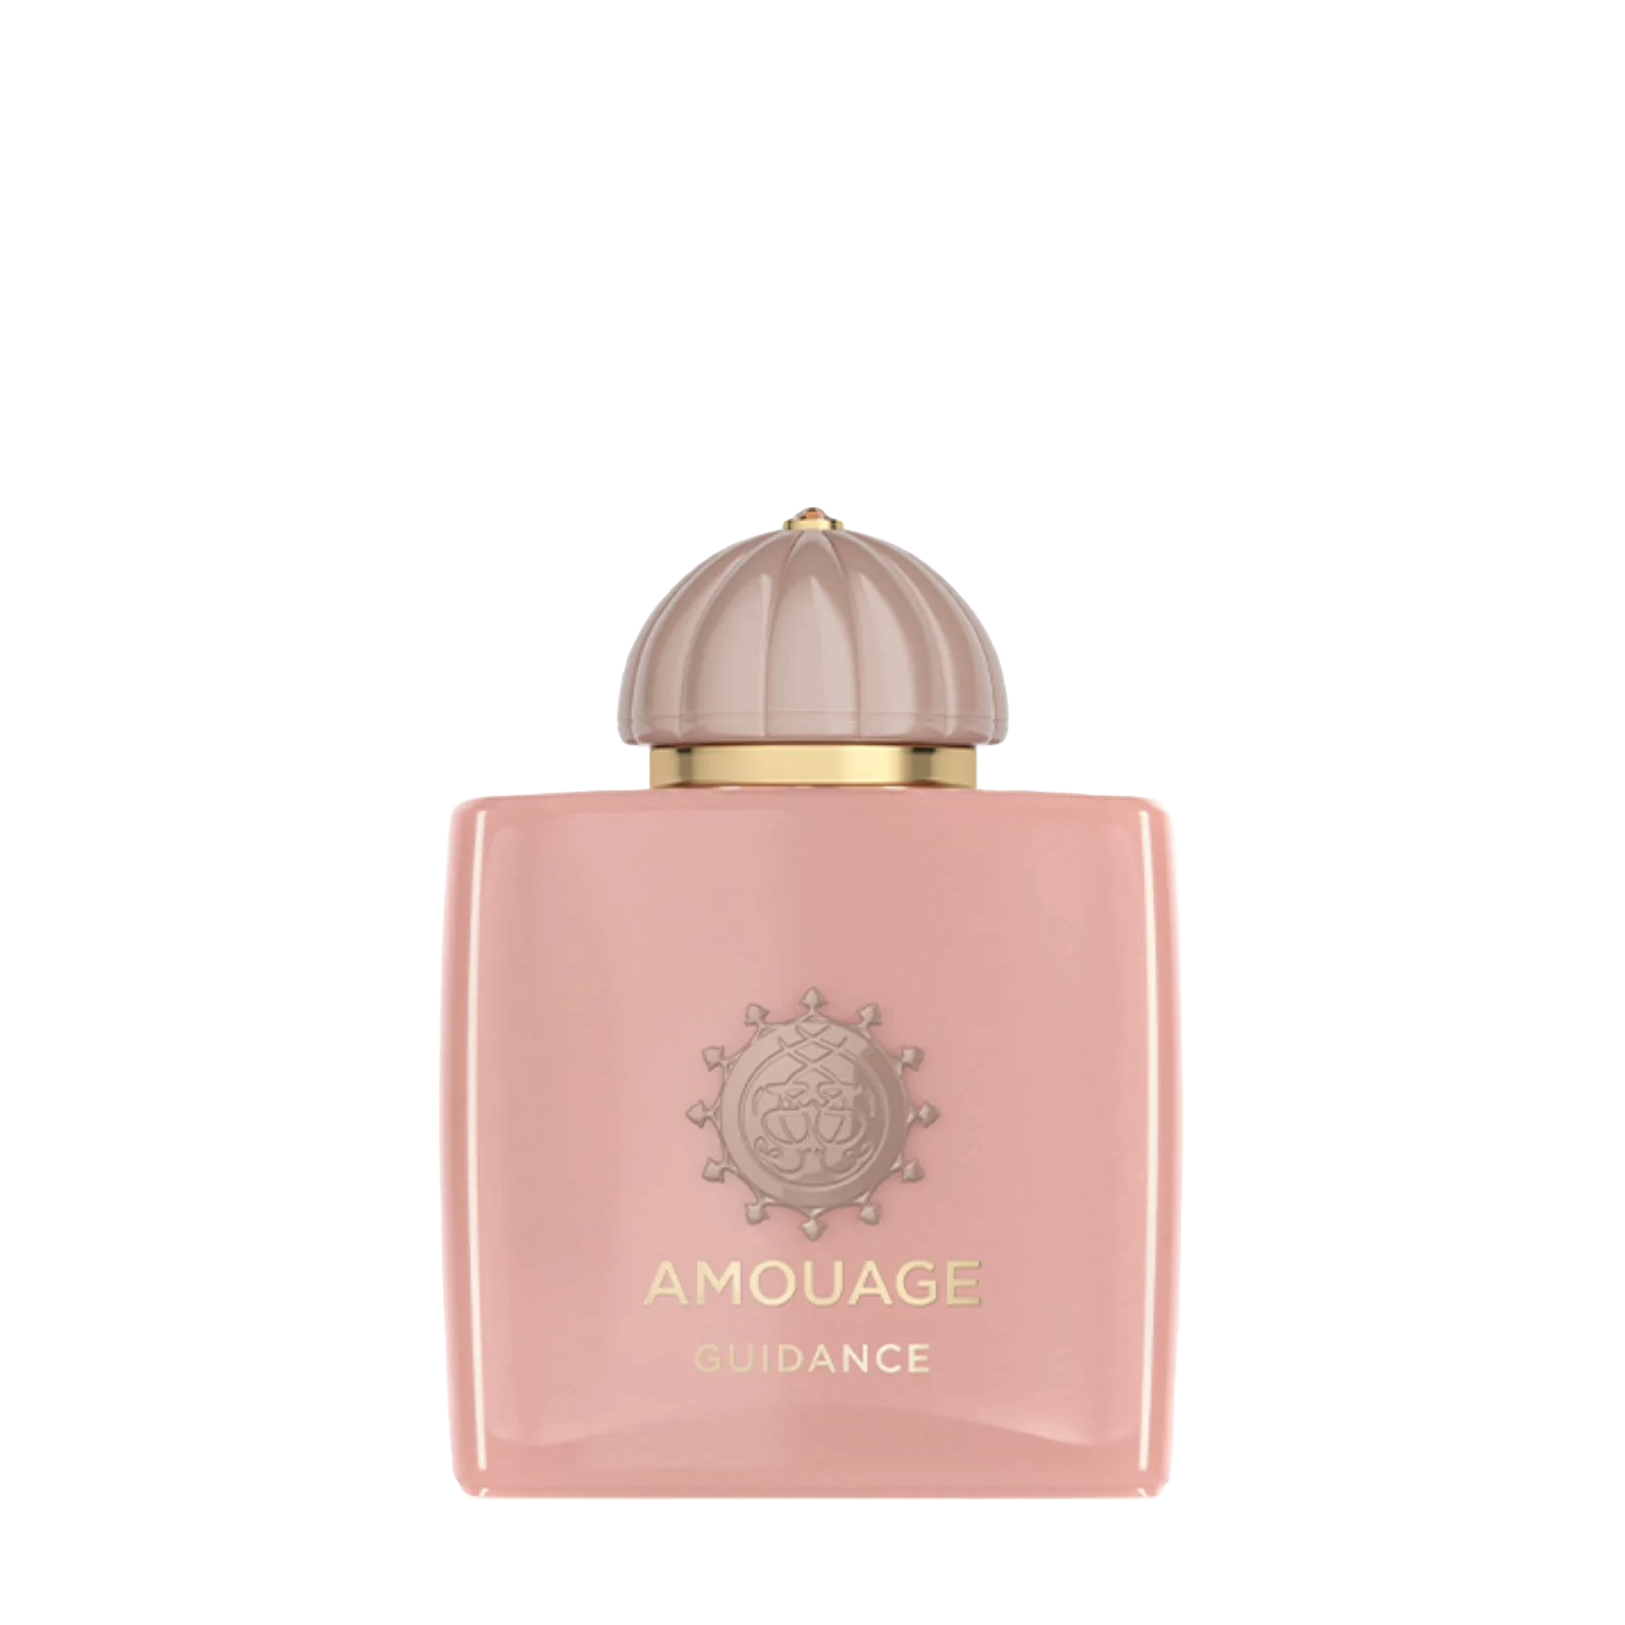 Amouage Guidance Samples Decants